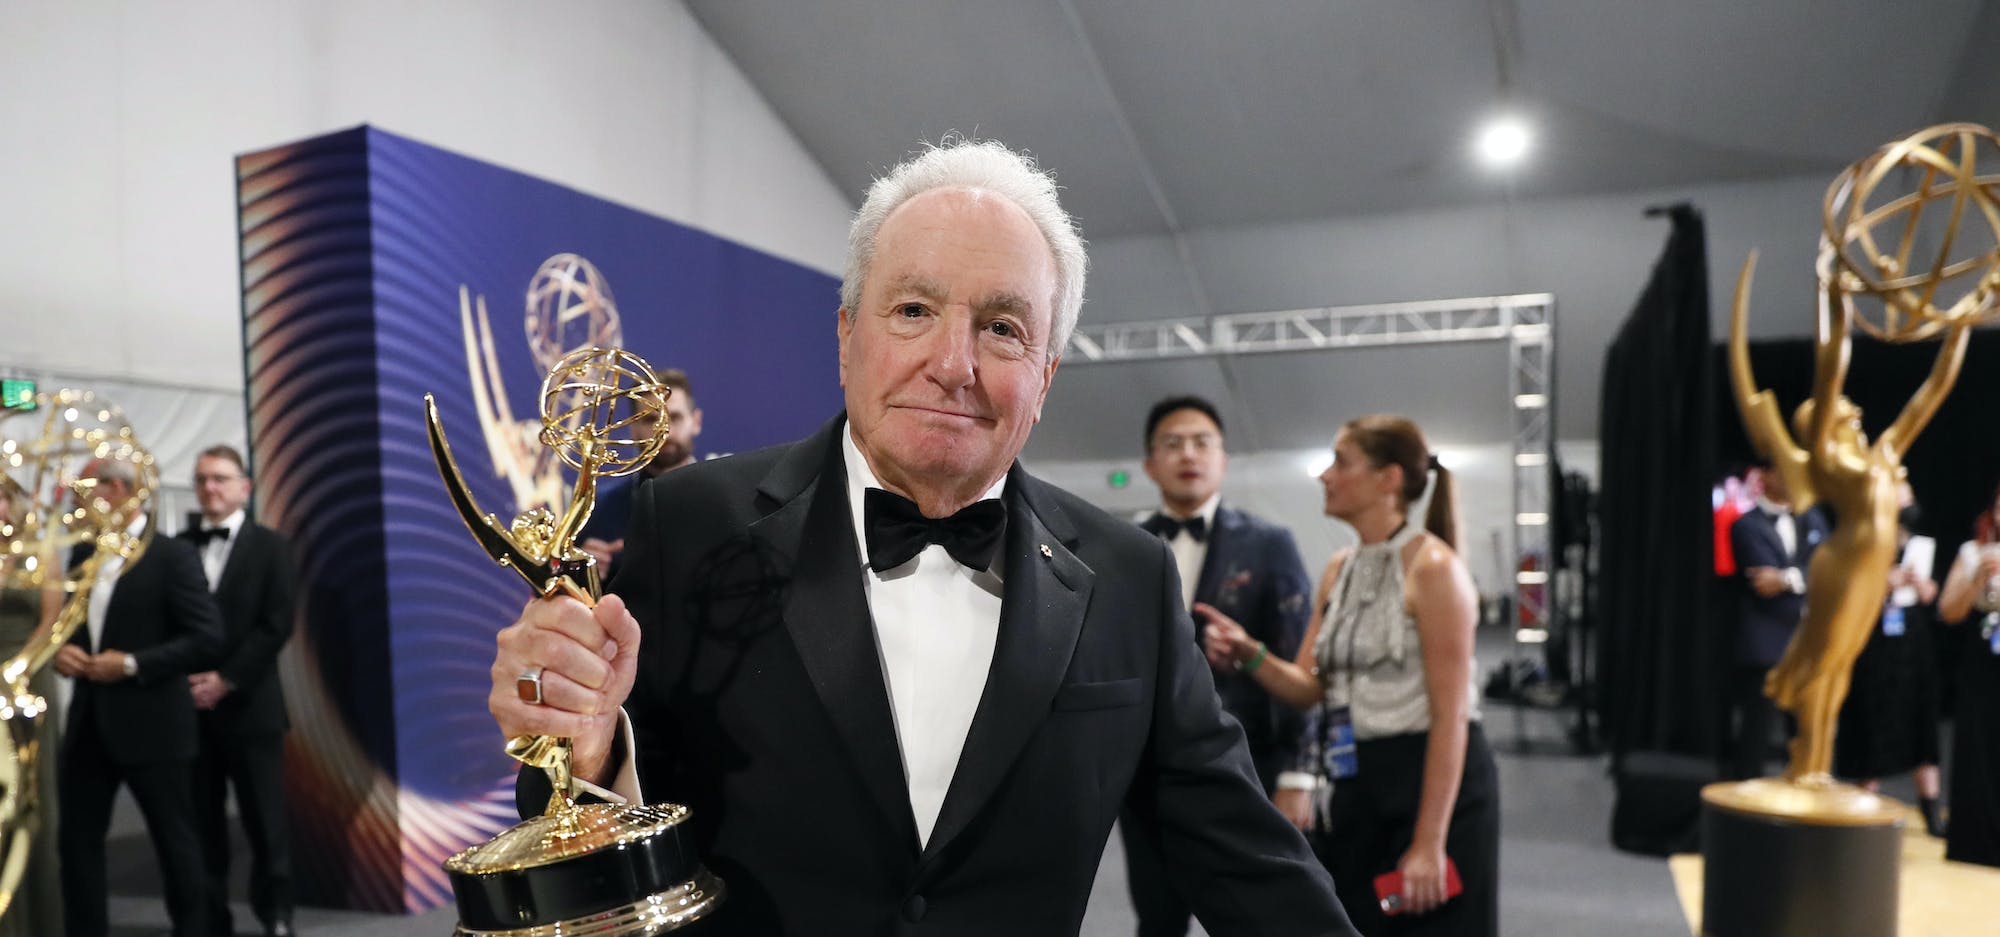 lorne michaels, the man behind the curtain at ‘saturday night live,’ has been minting comedy gold for nearly 50 years